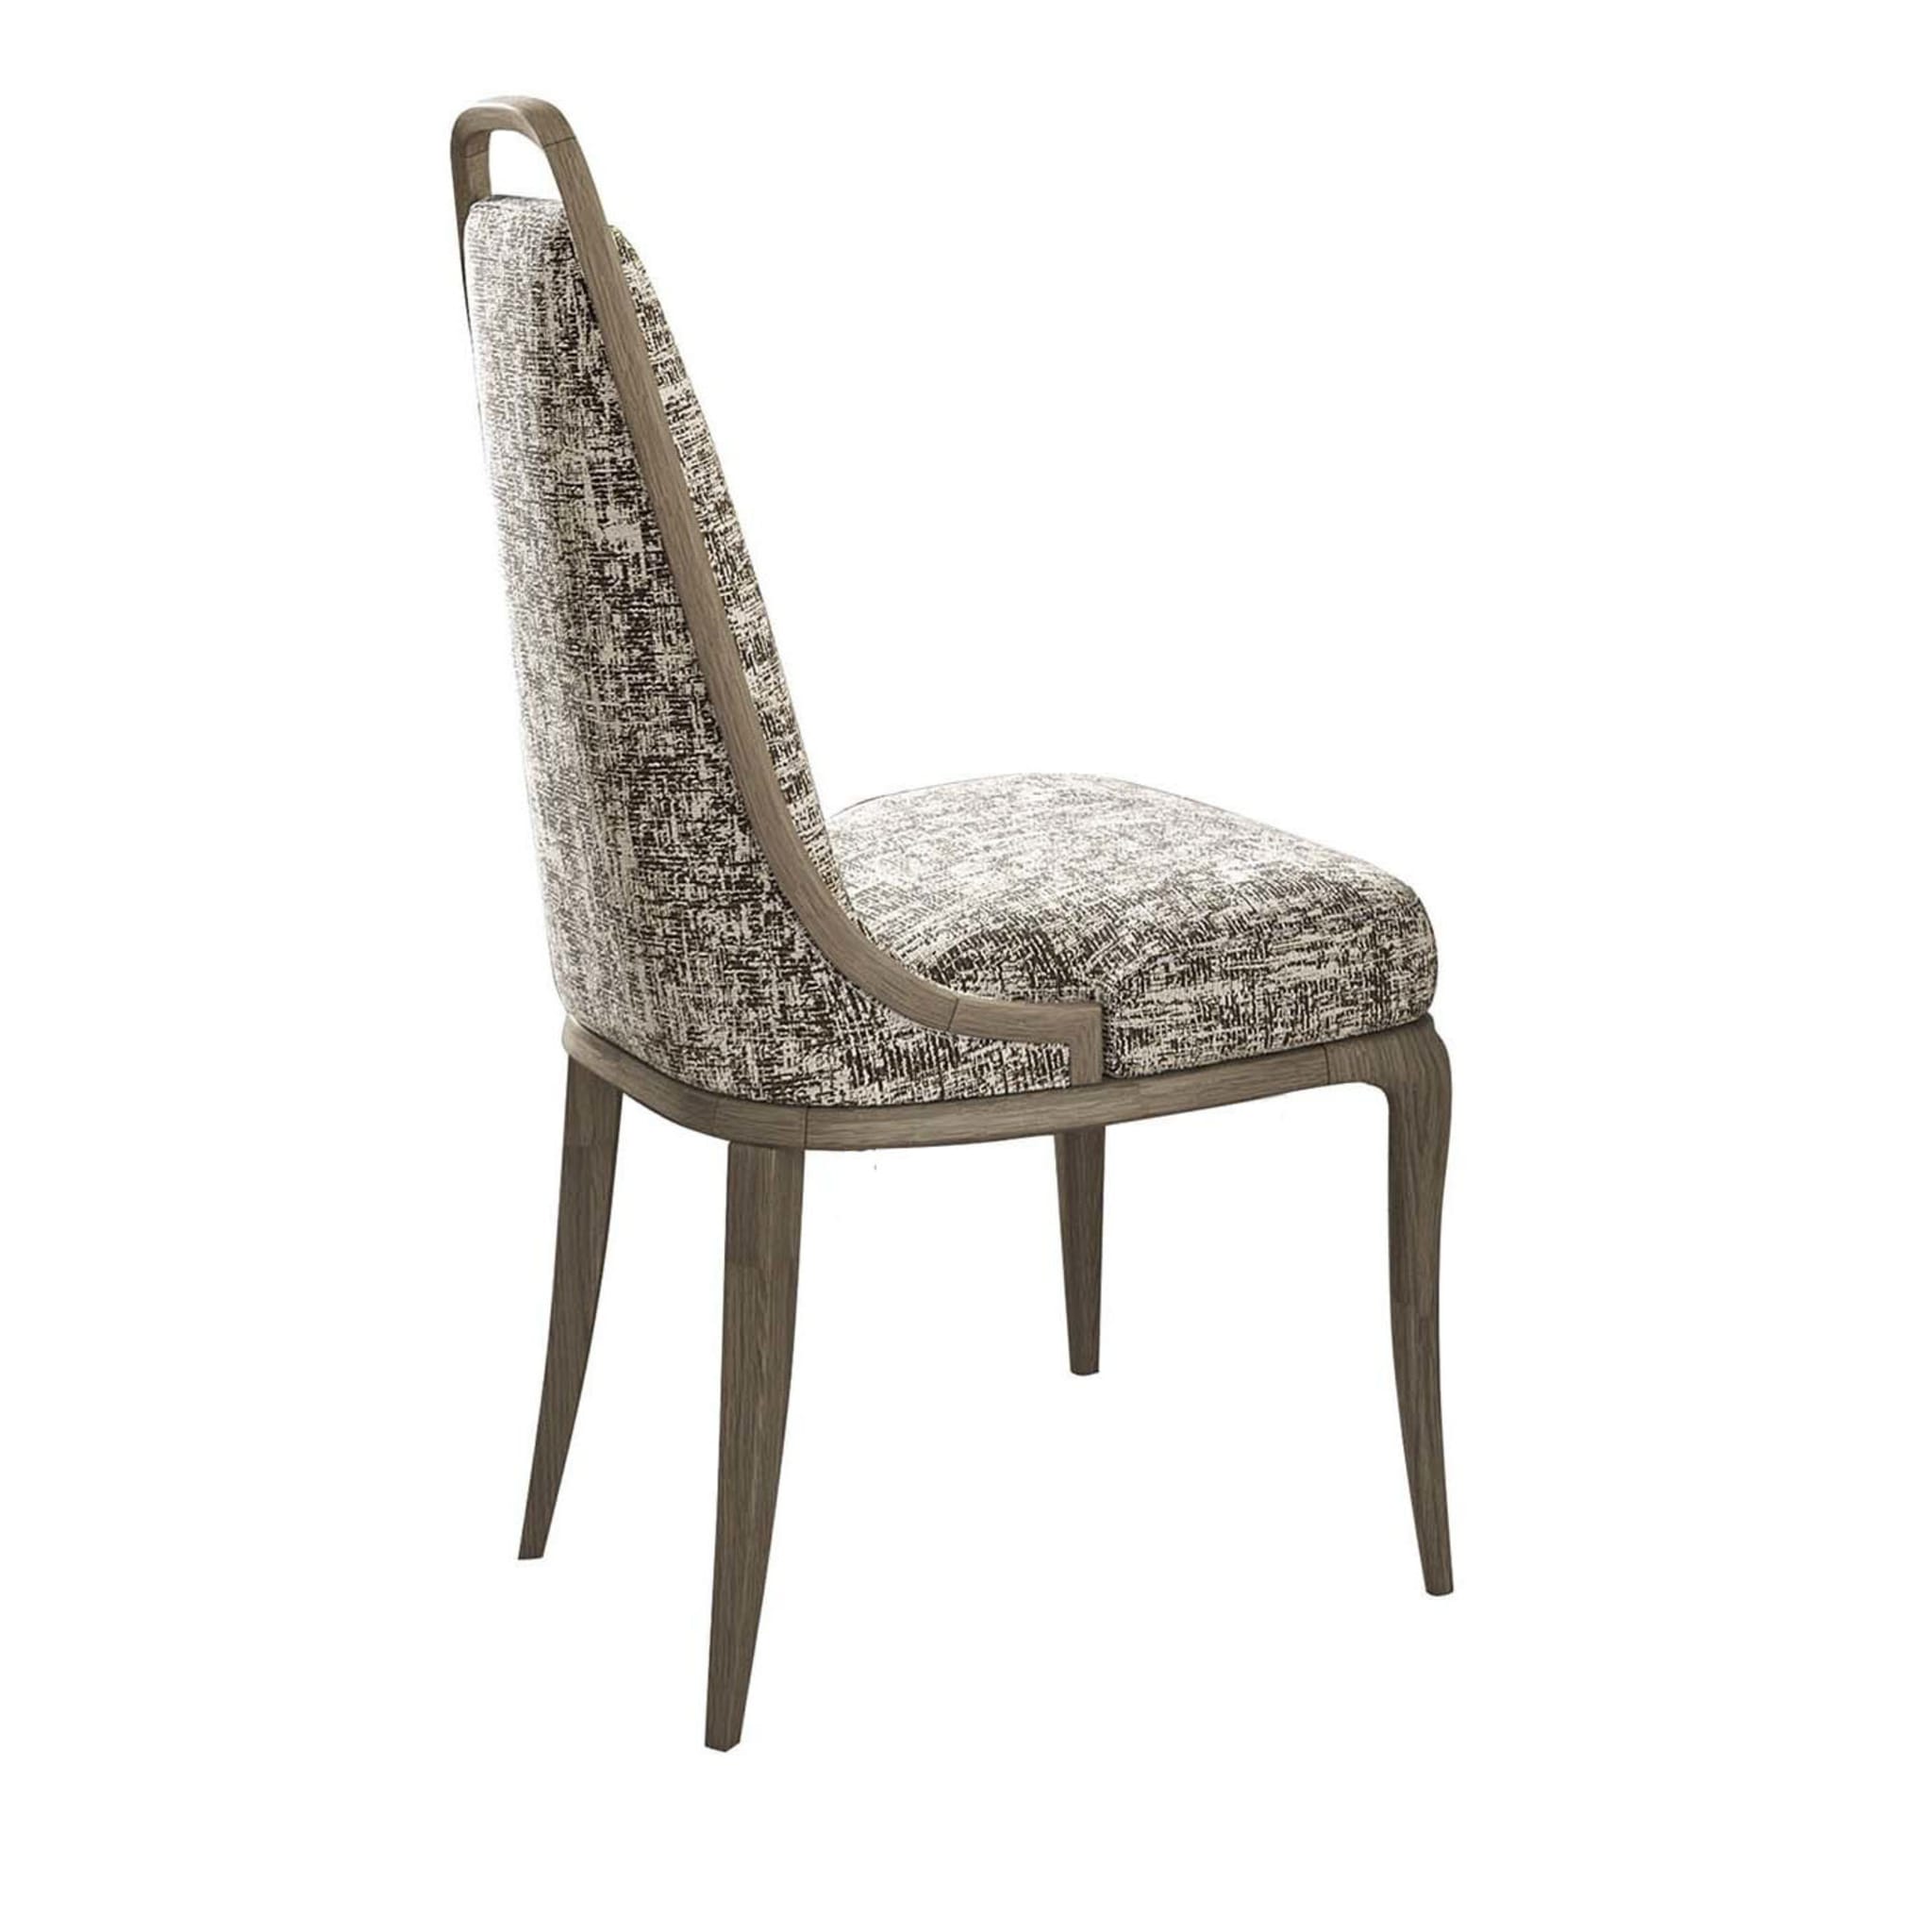 Beige Upholstered Chair - Main view